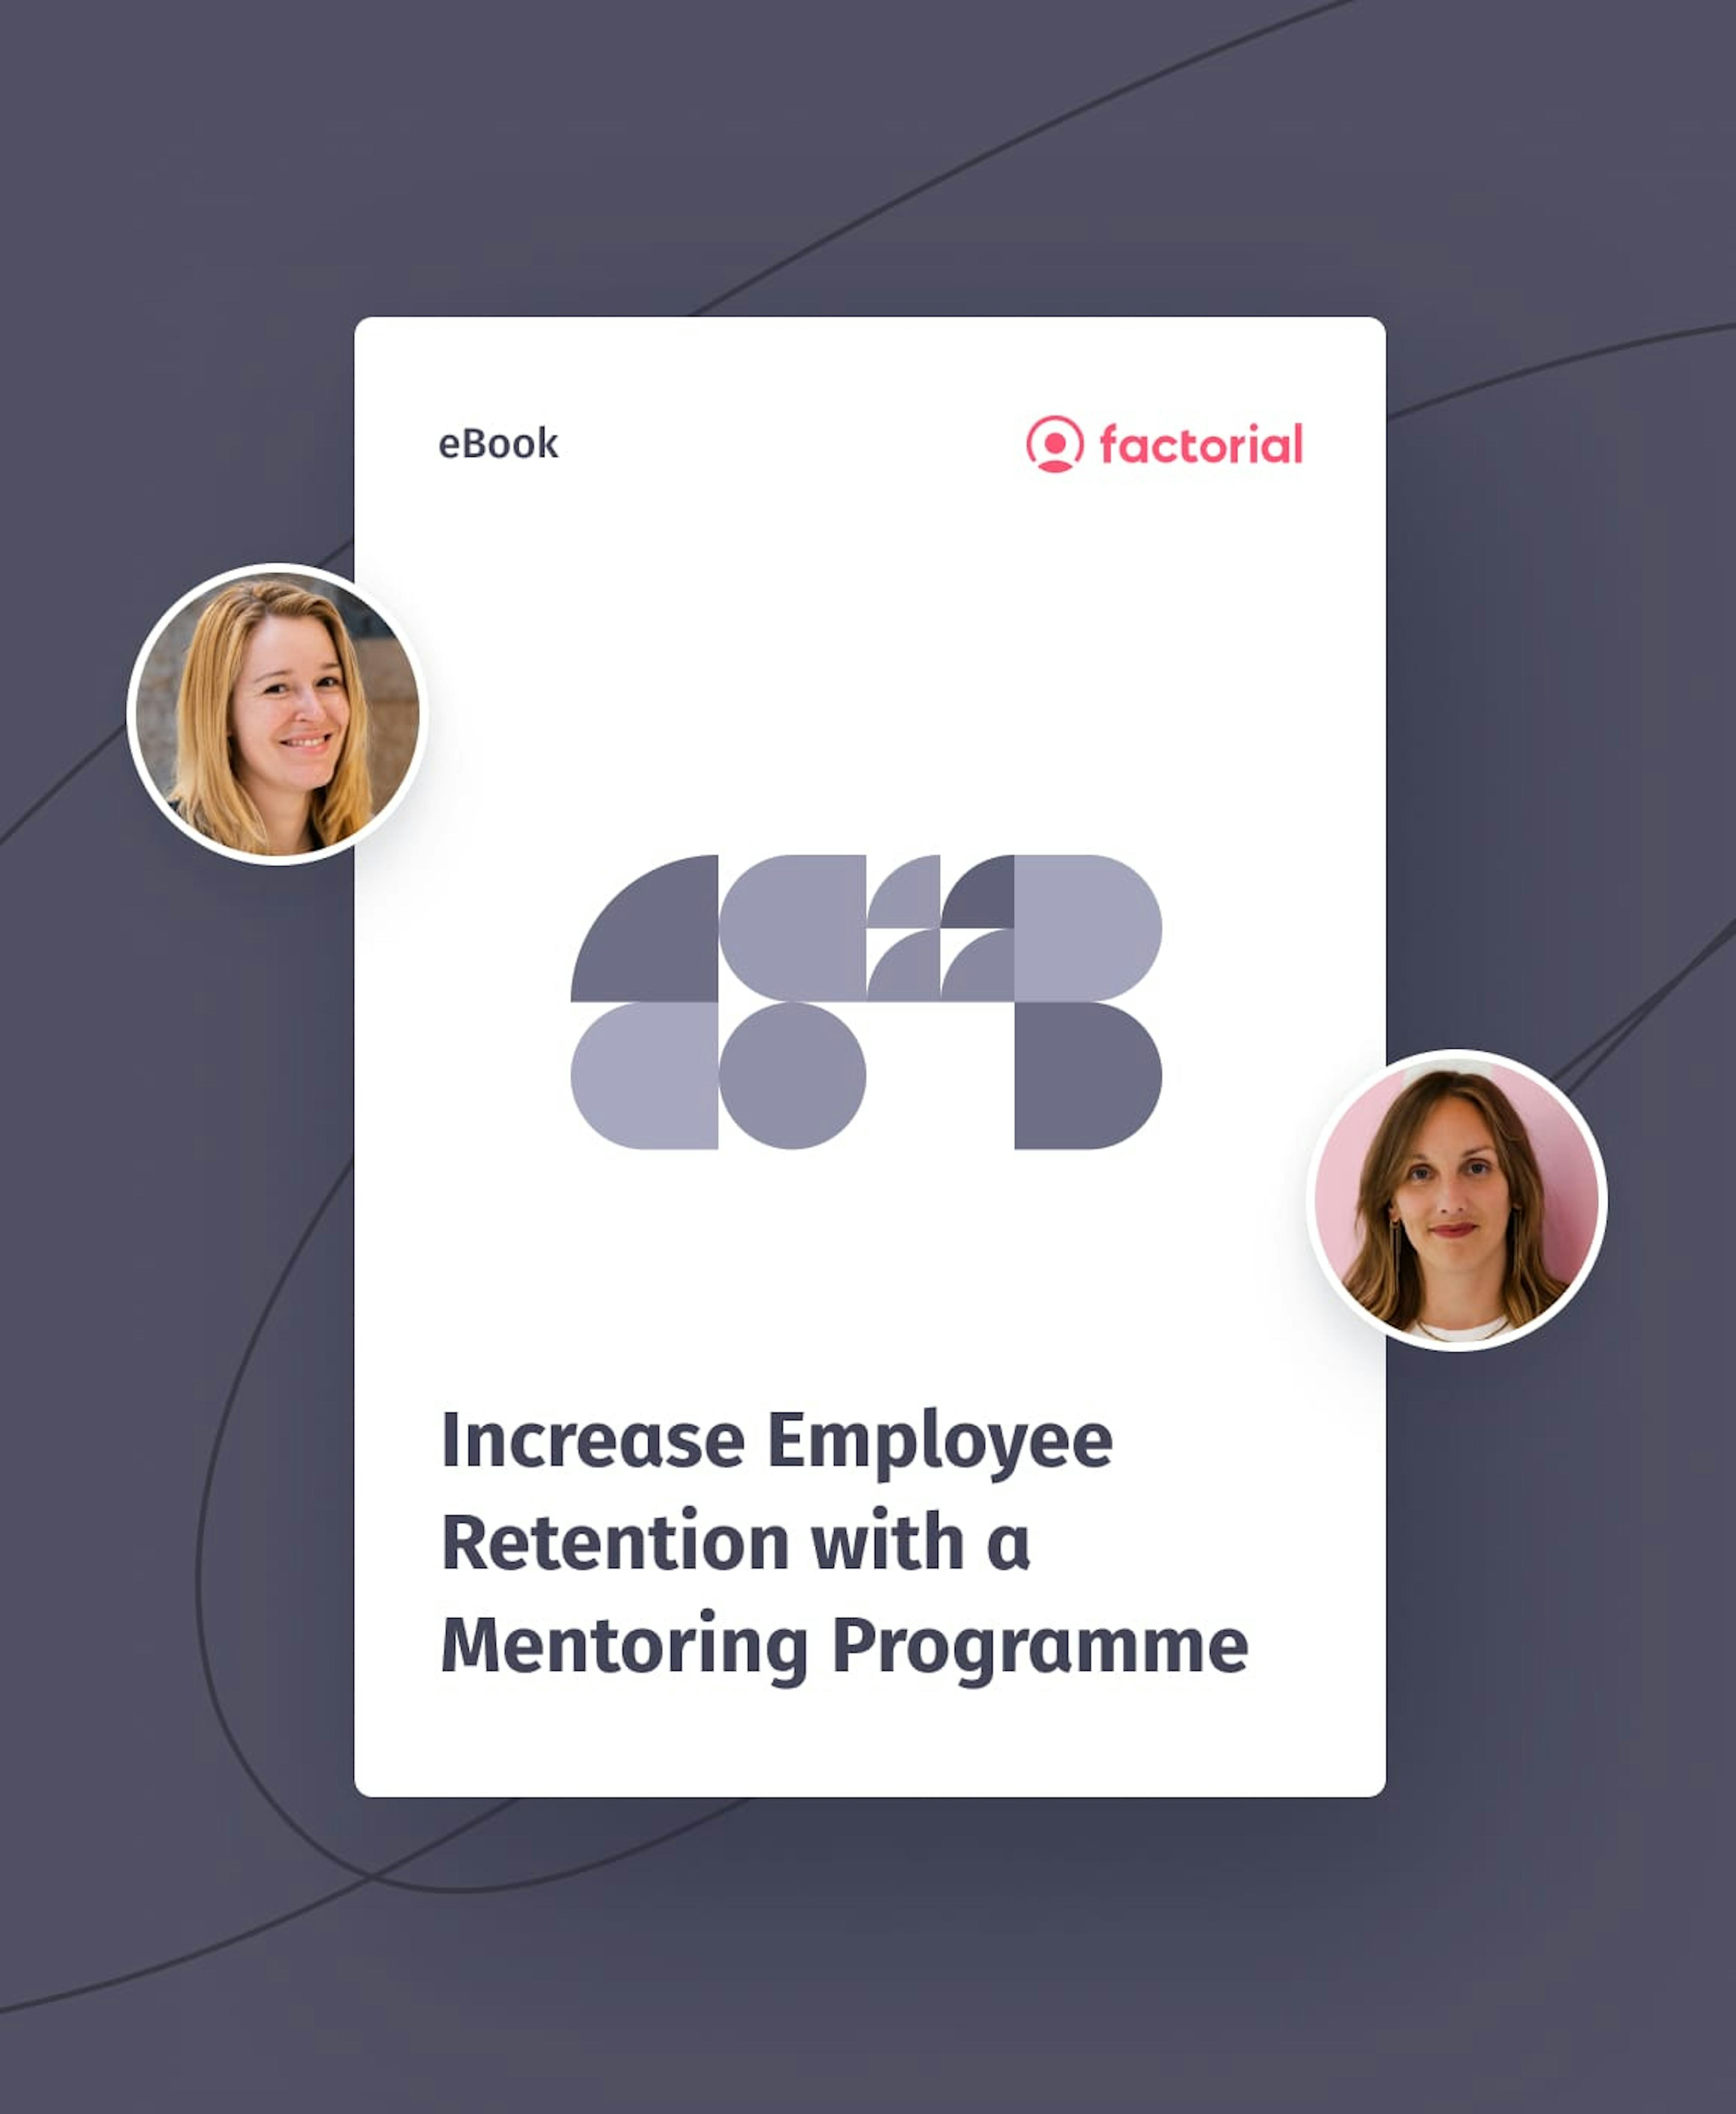 Increase Employee Retention with a Mentoring Programme